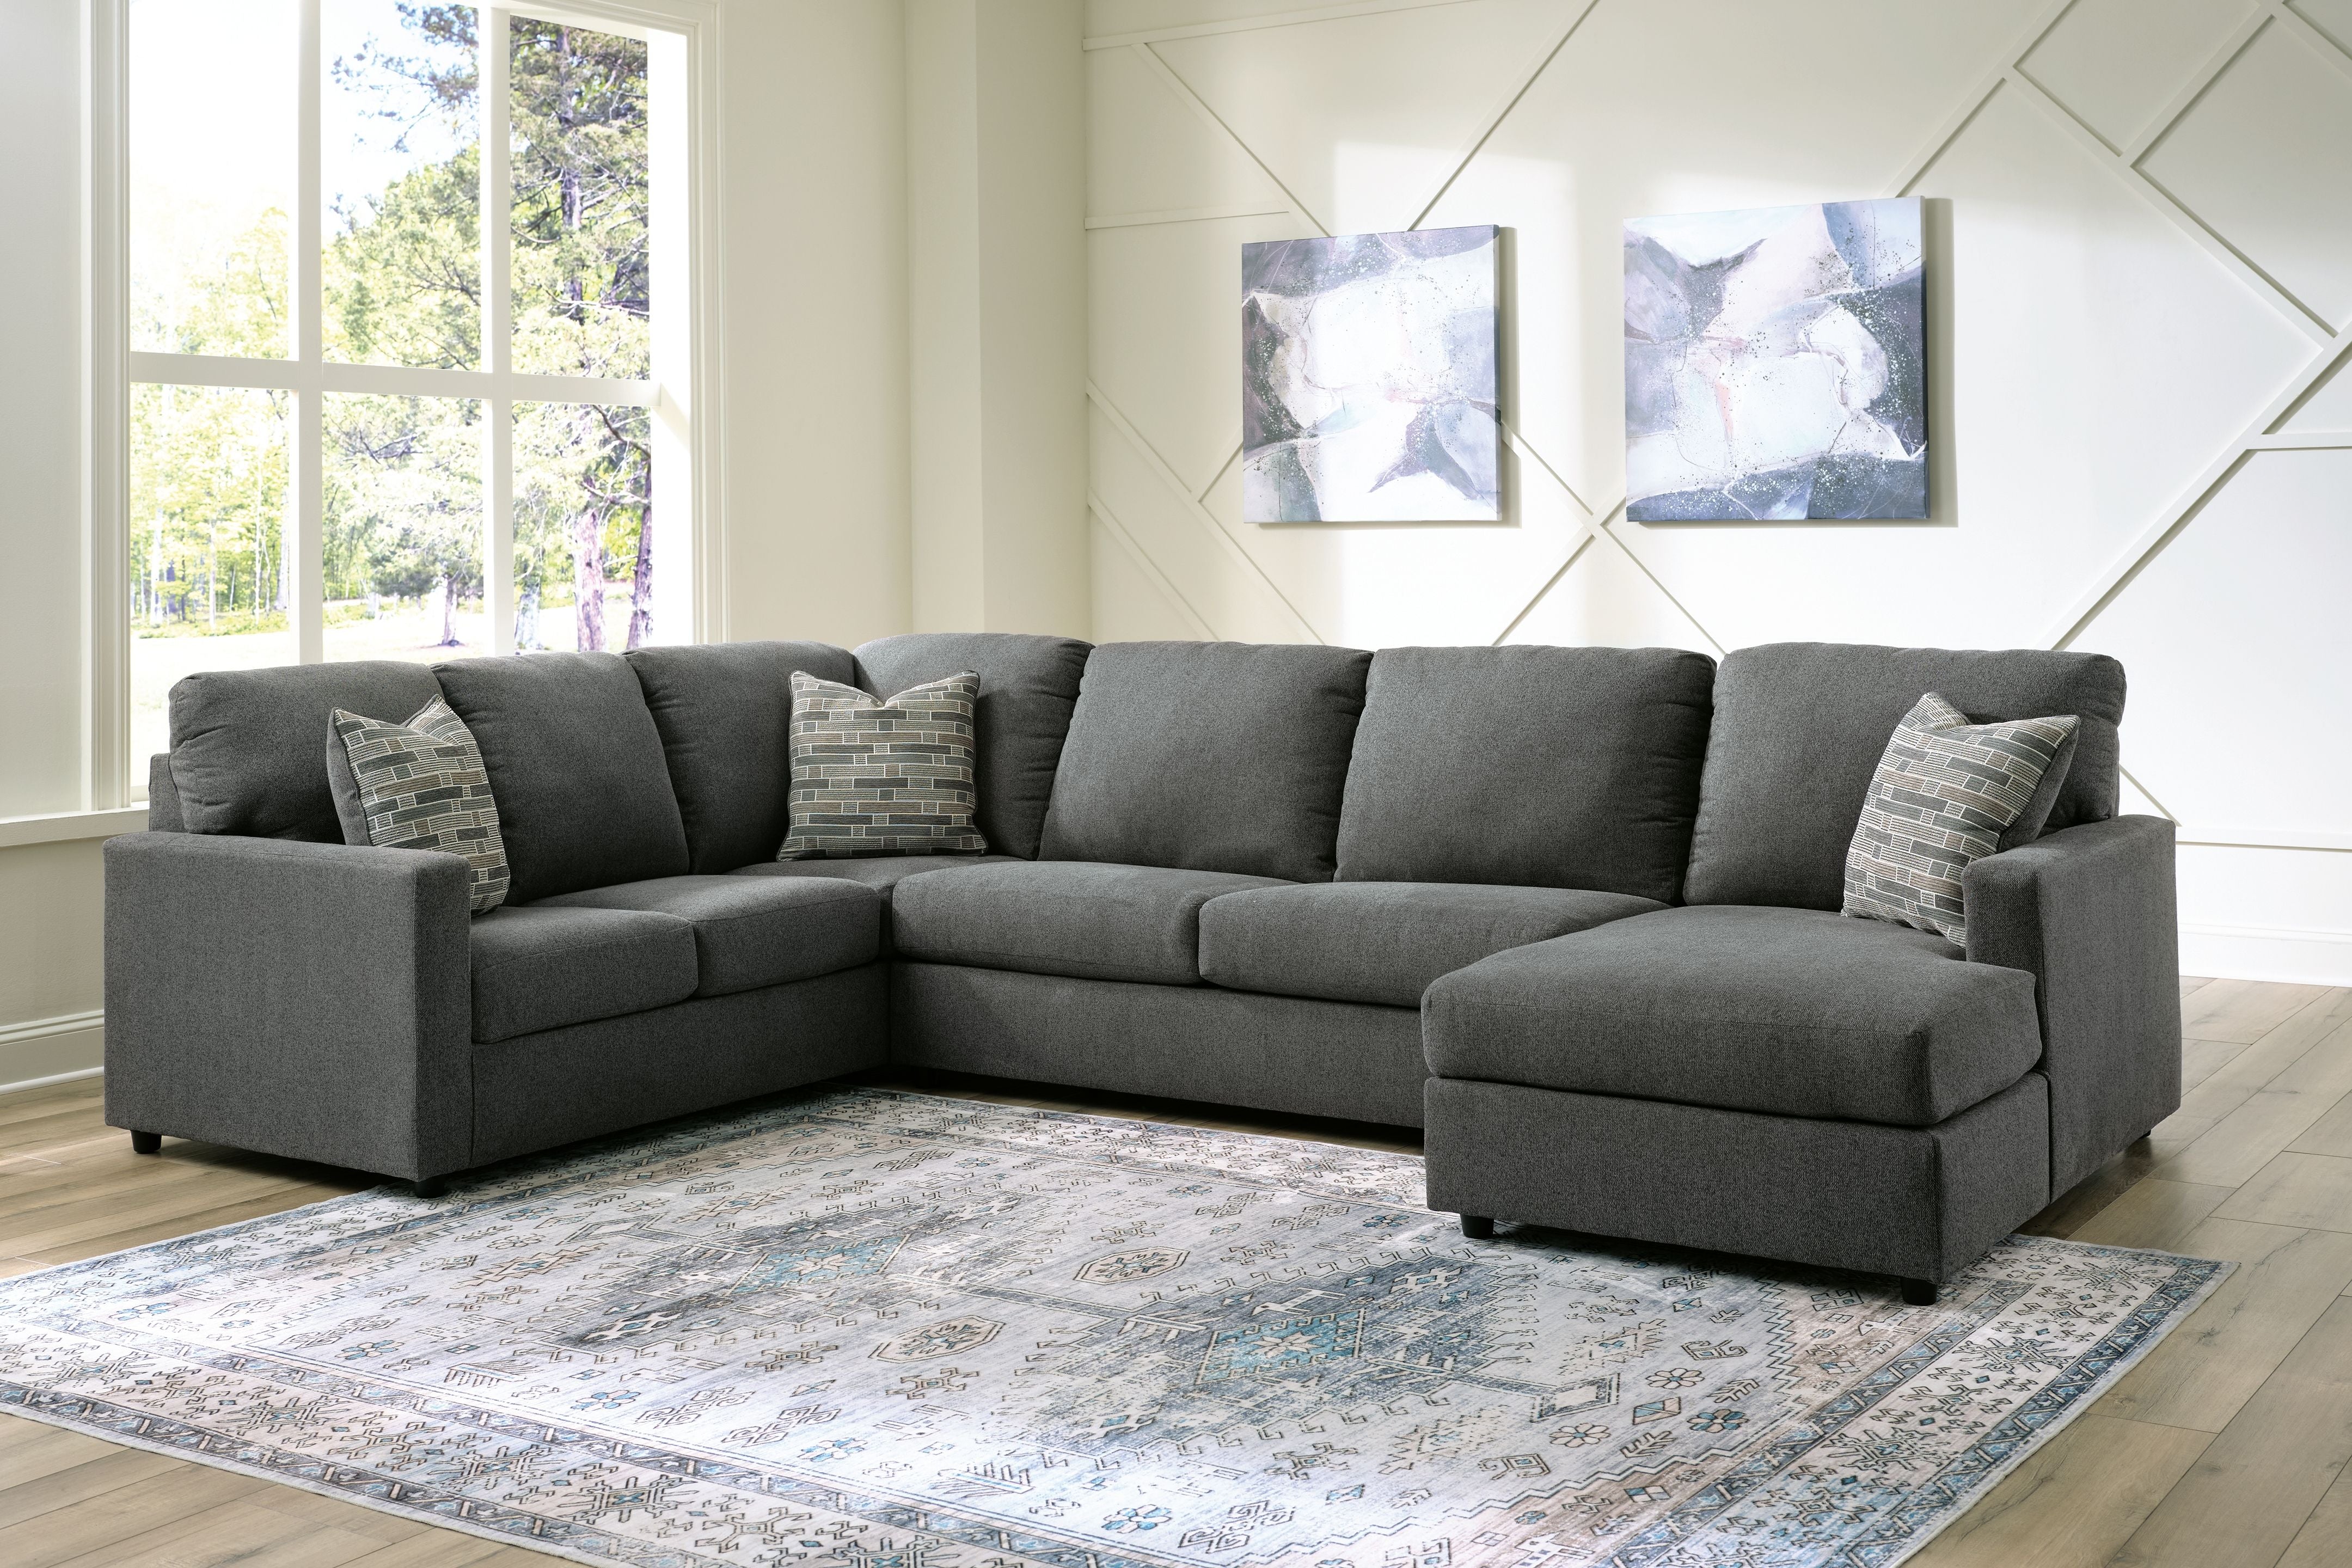 Edenfield 3 Piece Linen-Look U Shaped Sectional-Stationary Sectionals-American Furniture Outlet